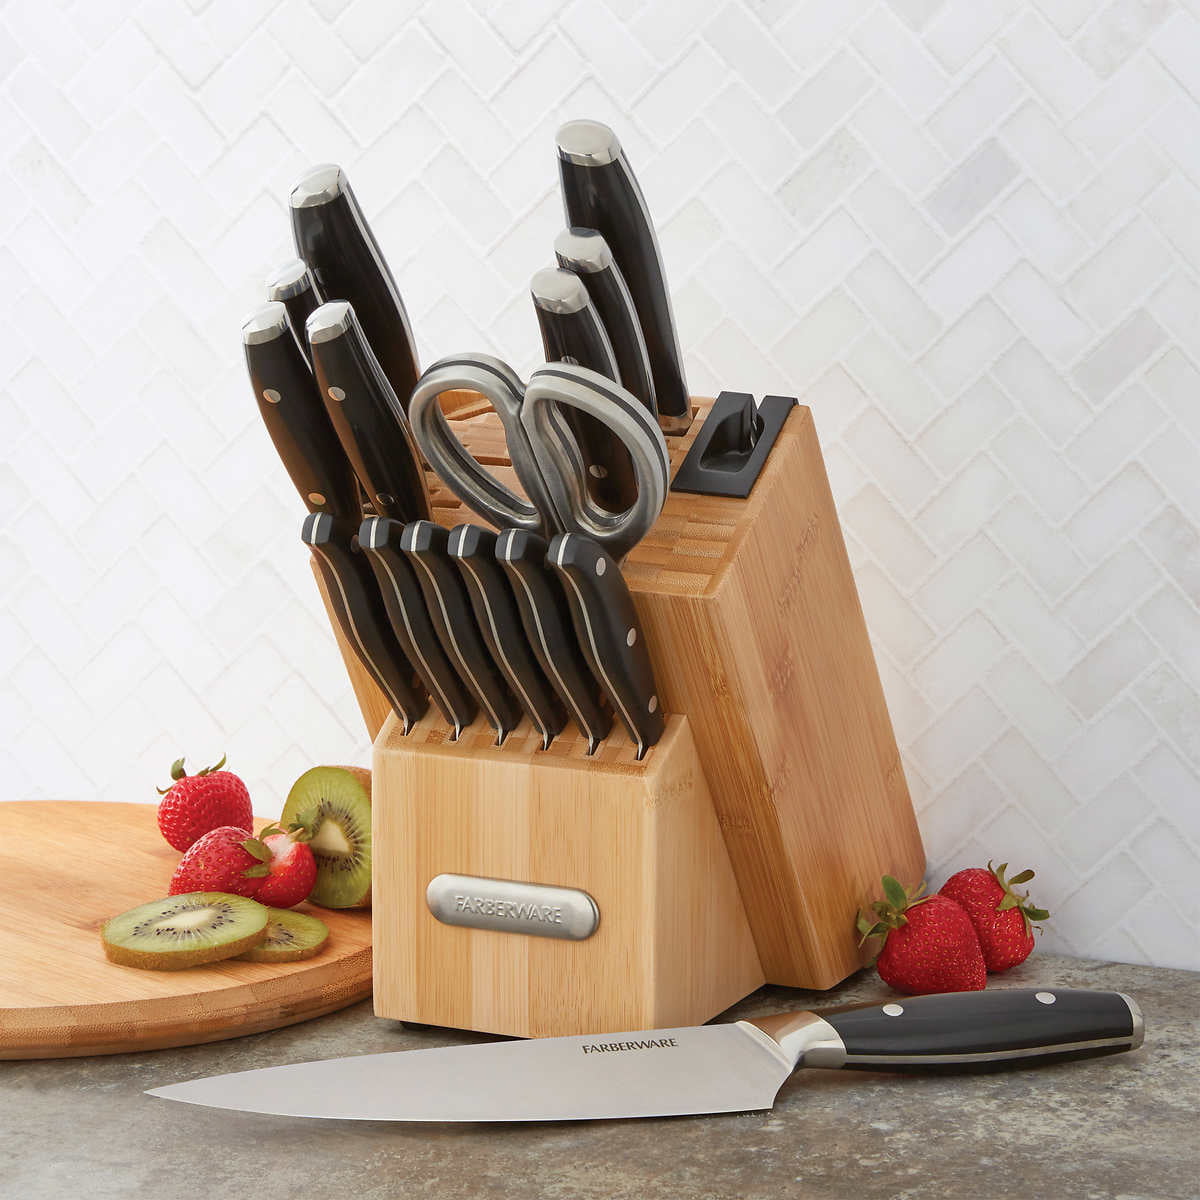 Farberware 16-Piece Forged Knife Block Set with Built-in Knife Sharpener, Triple Rivet Handles, High Carbon Japanese Stainless Steel Kitchen Knives